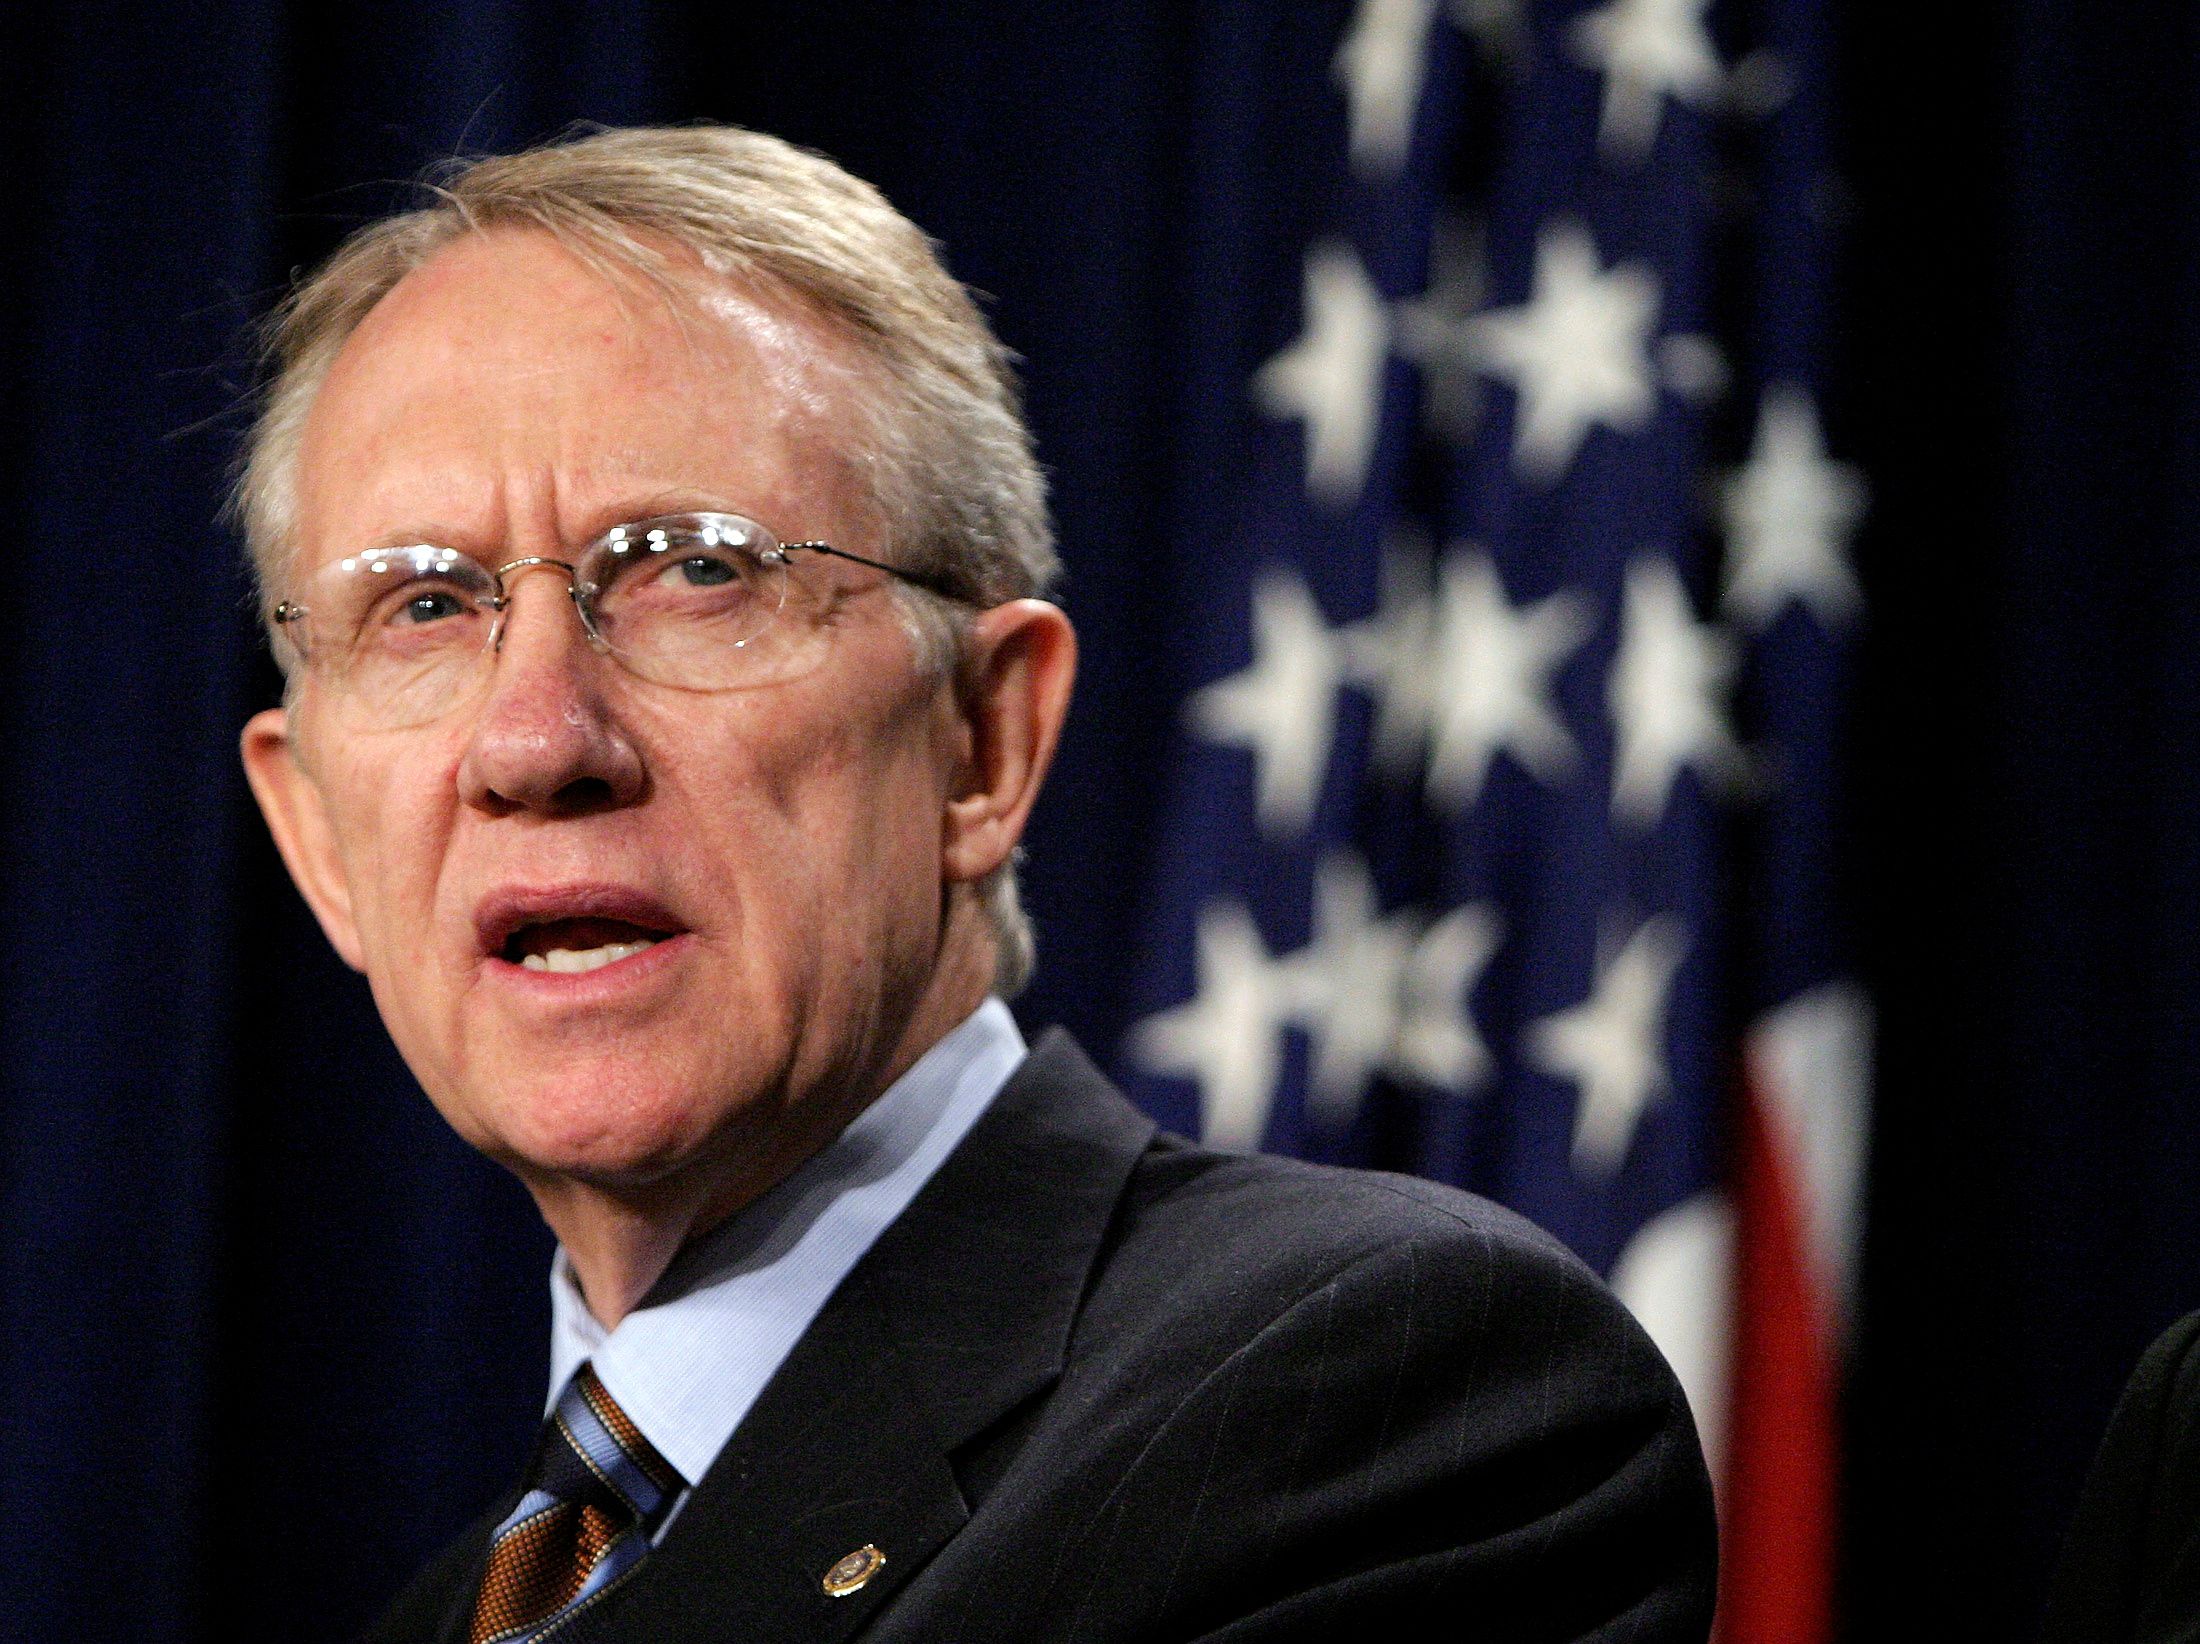 FILE PHOTO: Newly elected Senate Minority Leader Harry Reid (D-NV), speaks during a news conference held at the Senate Radio and TV Gallery at the U.S Capitol in Washington November 16, 2004. REUTERS/Shaun Heasley SH/JRB/File Photo